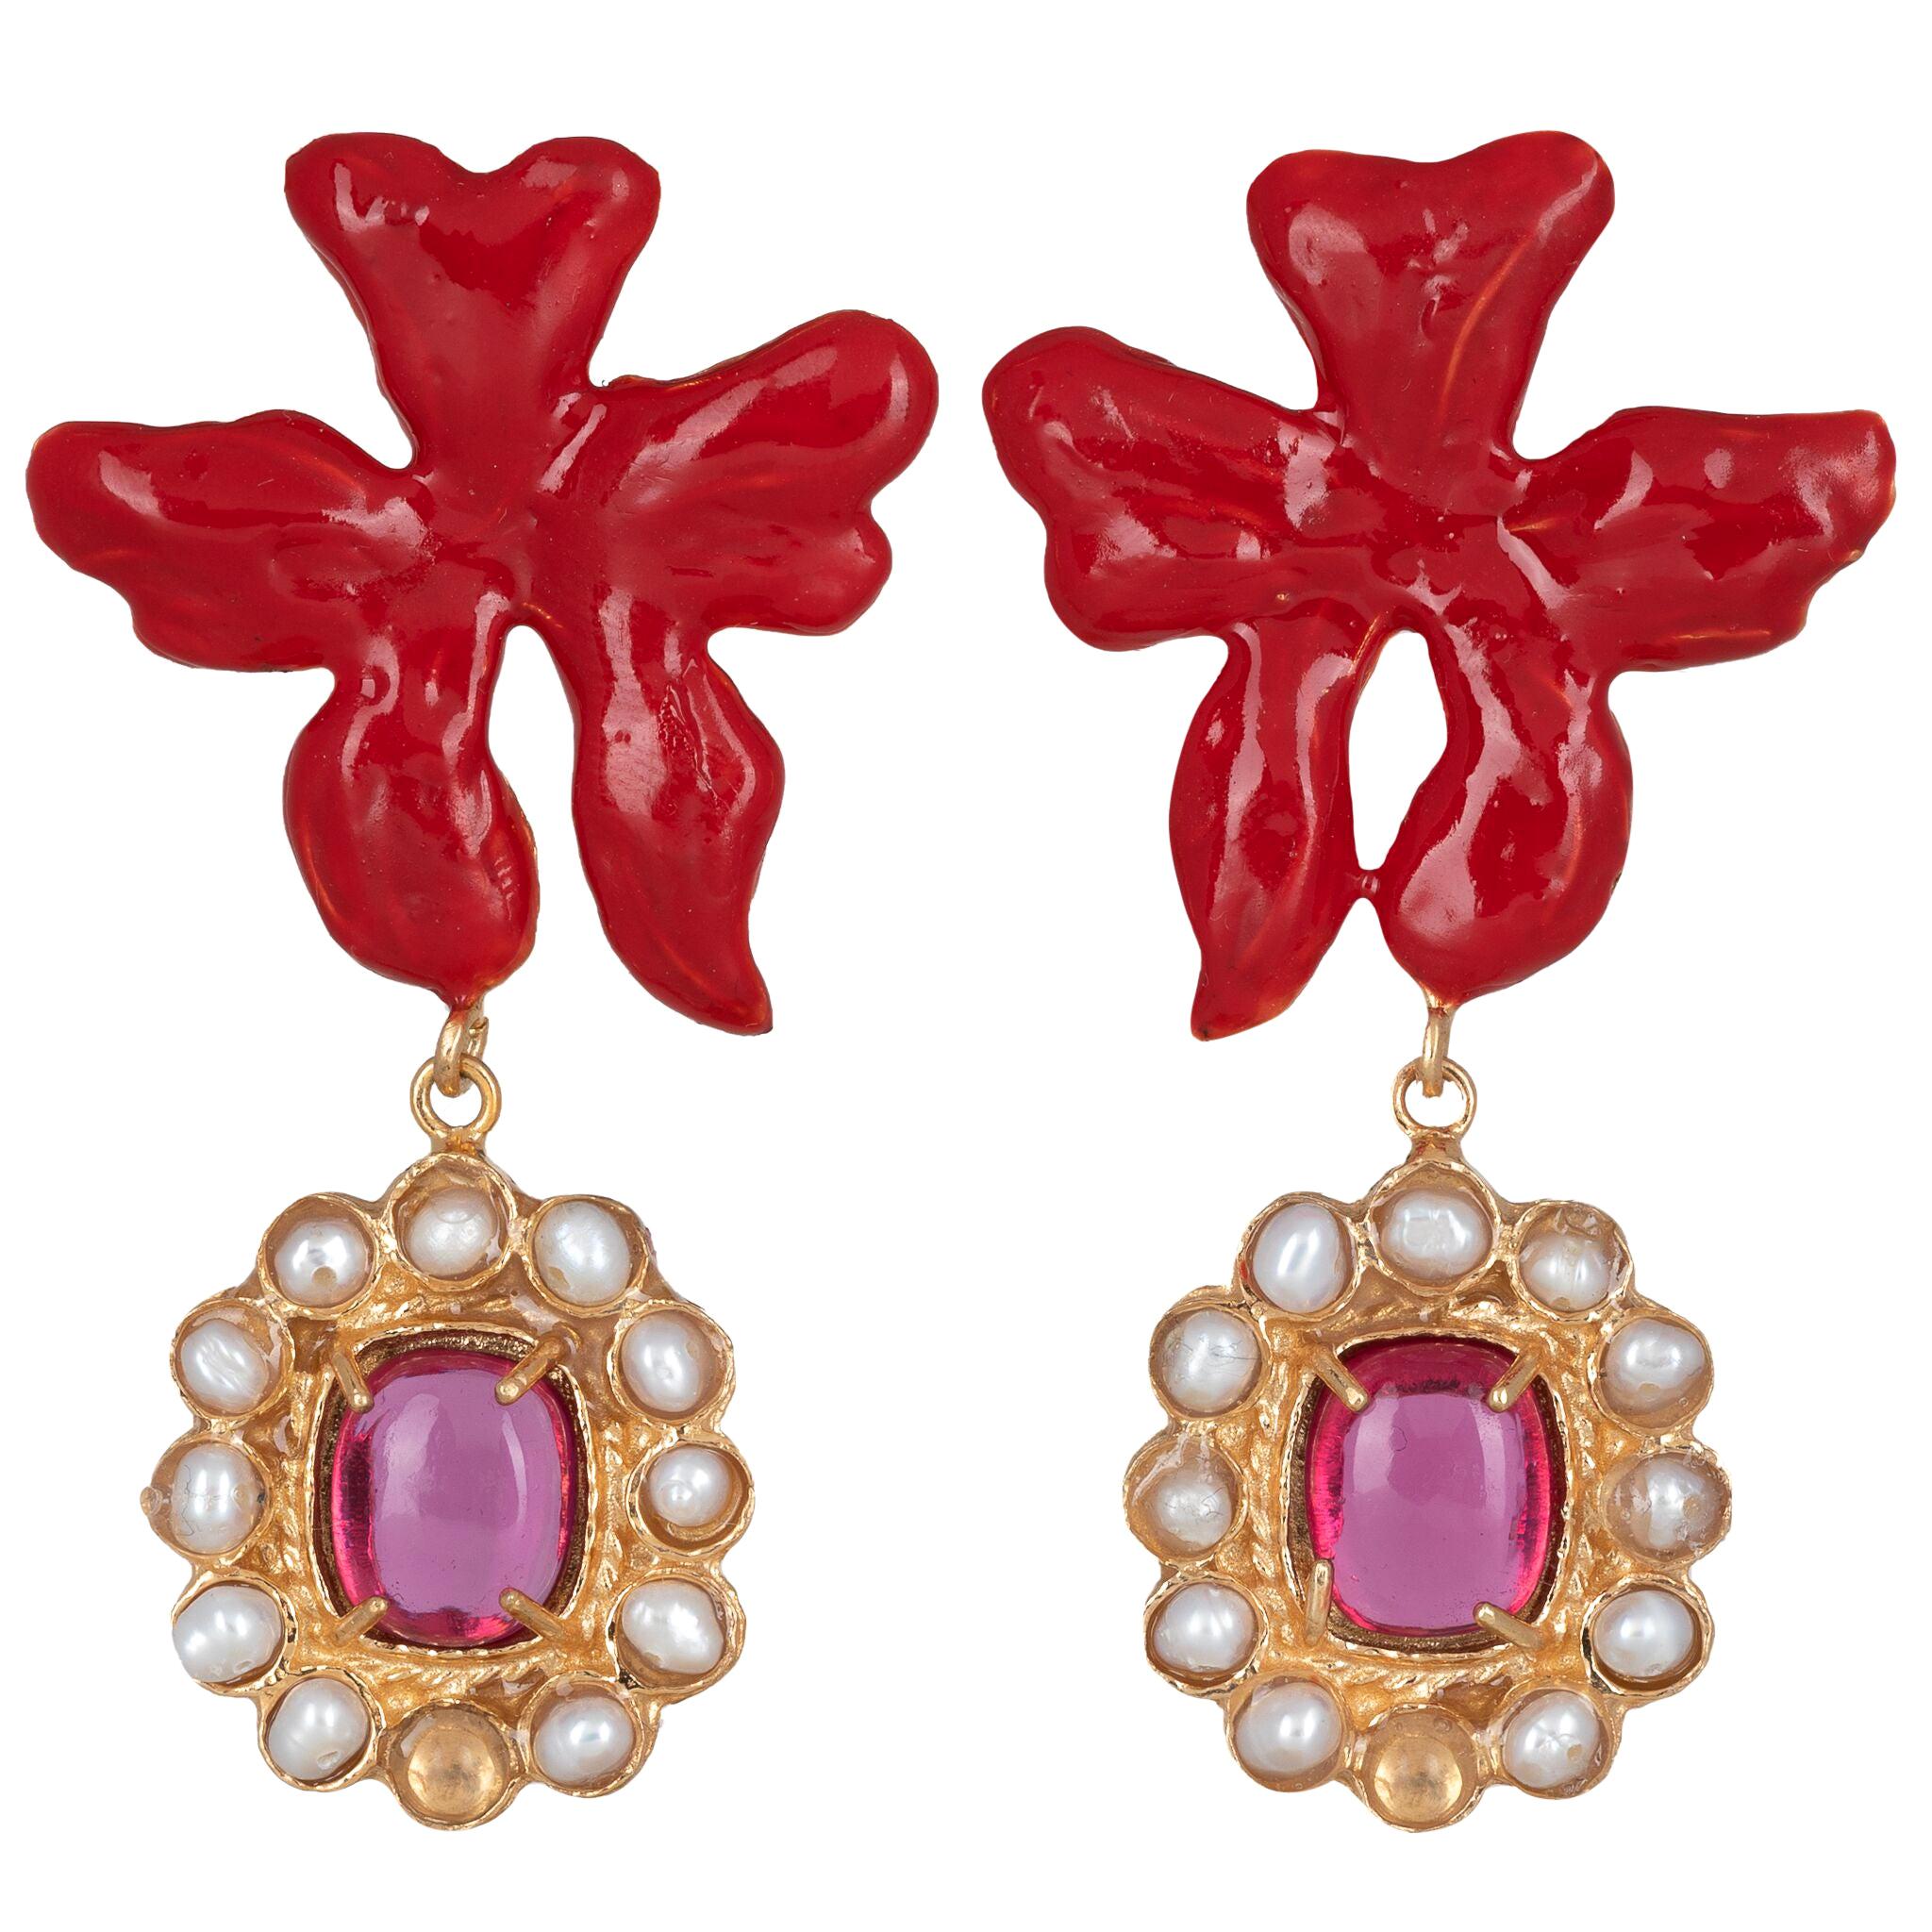 Christie Nicolaides Gold Isabella Earrings in Red Enamel & Pink Quartz  For Sale